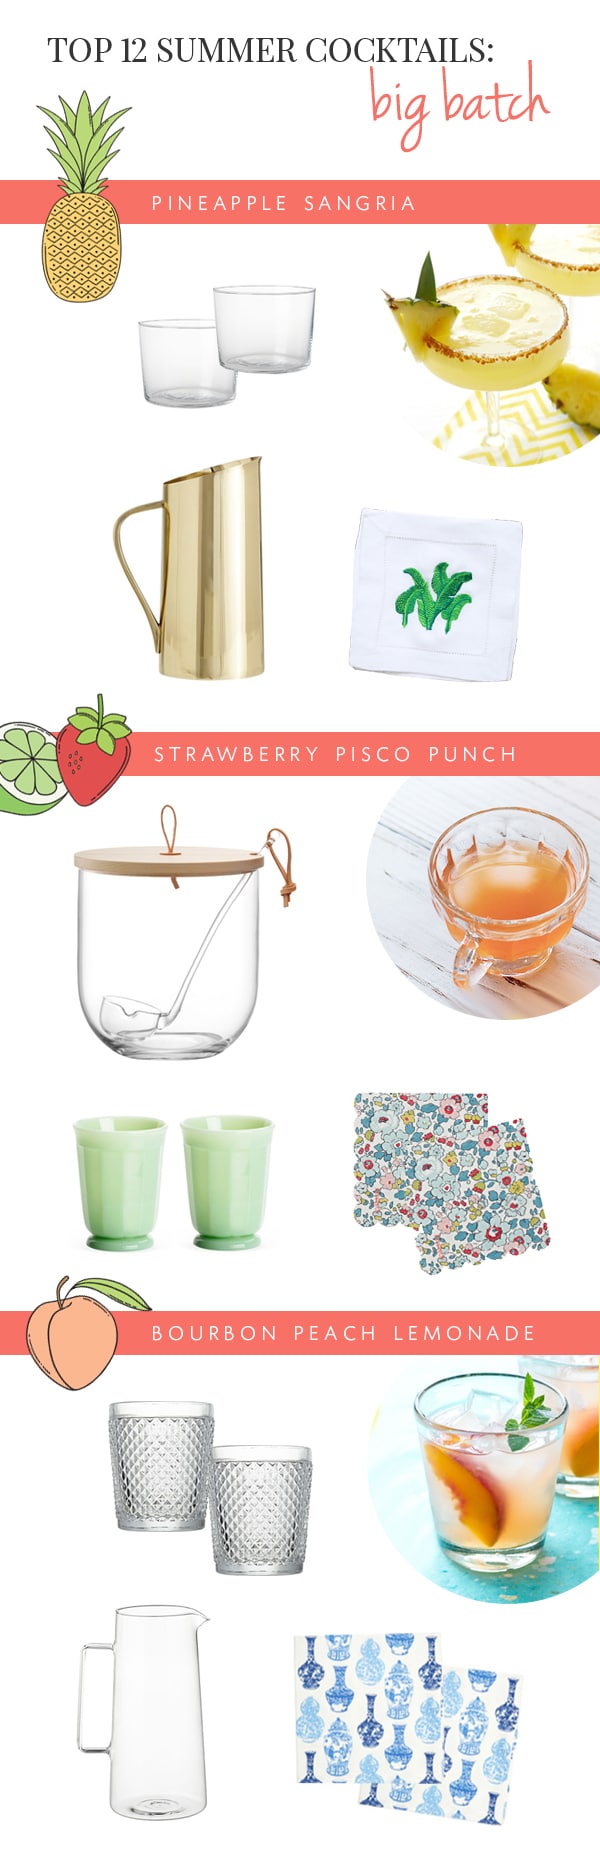 our top 12 summer cocktail recipes - big batch drinks | via coco kelley